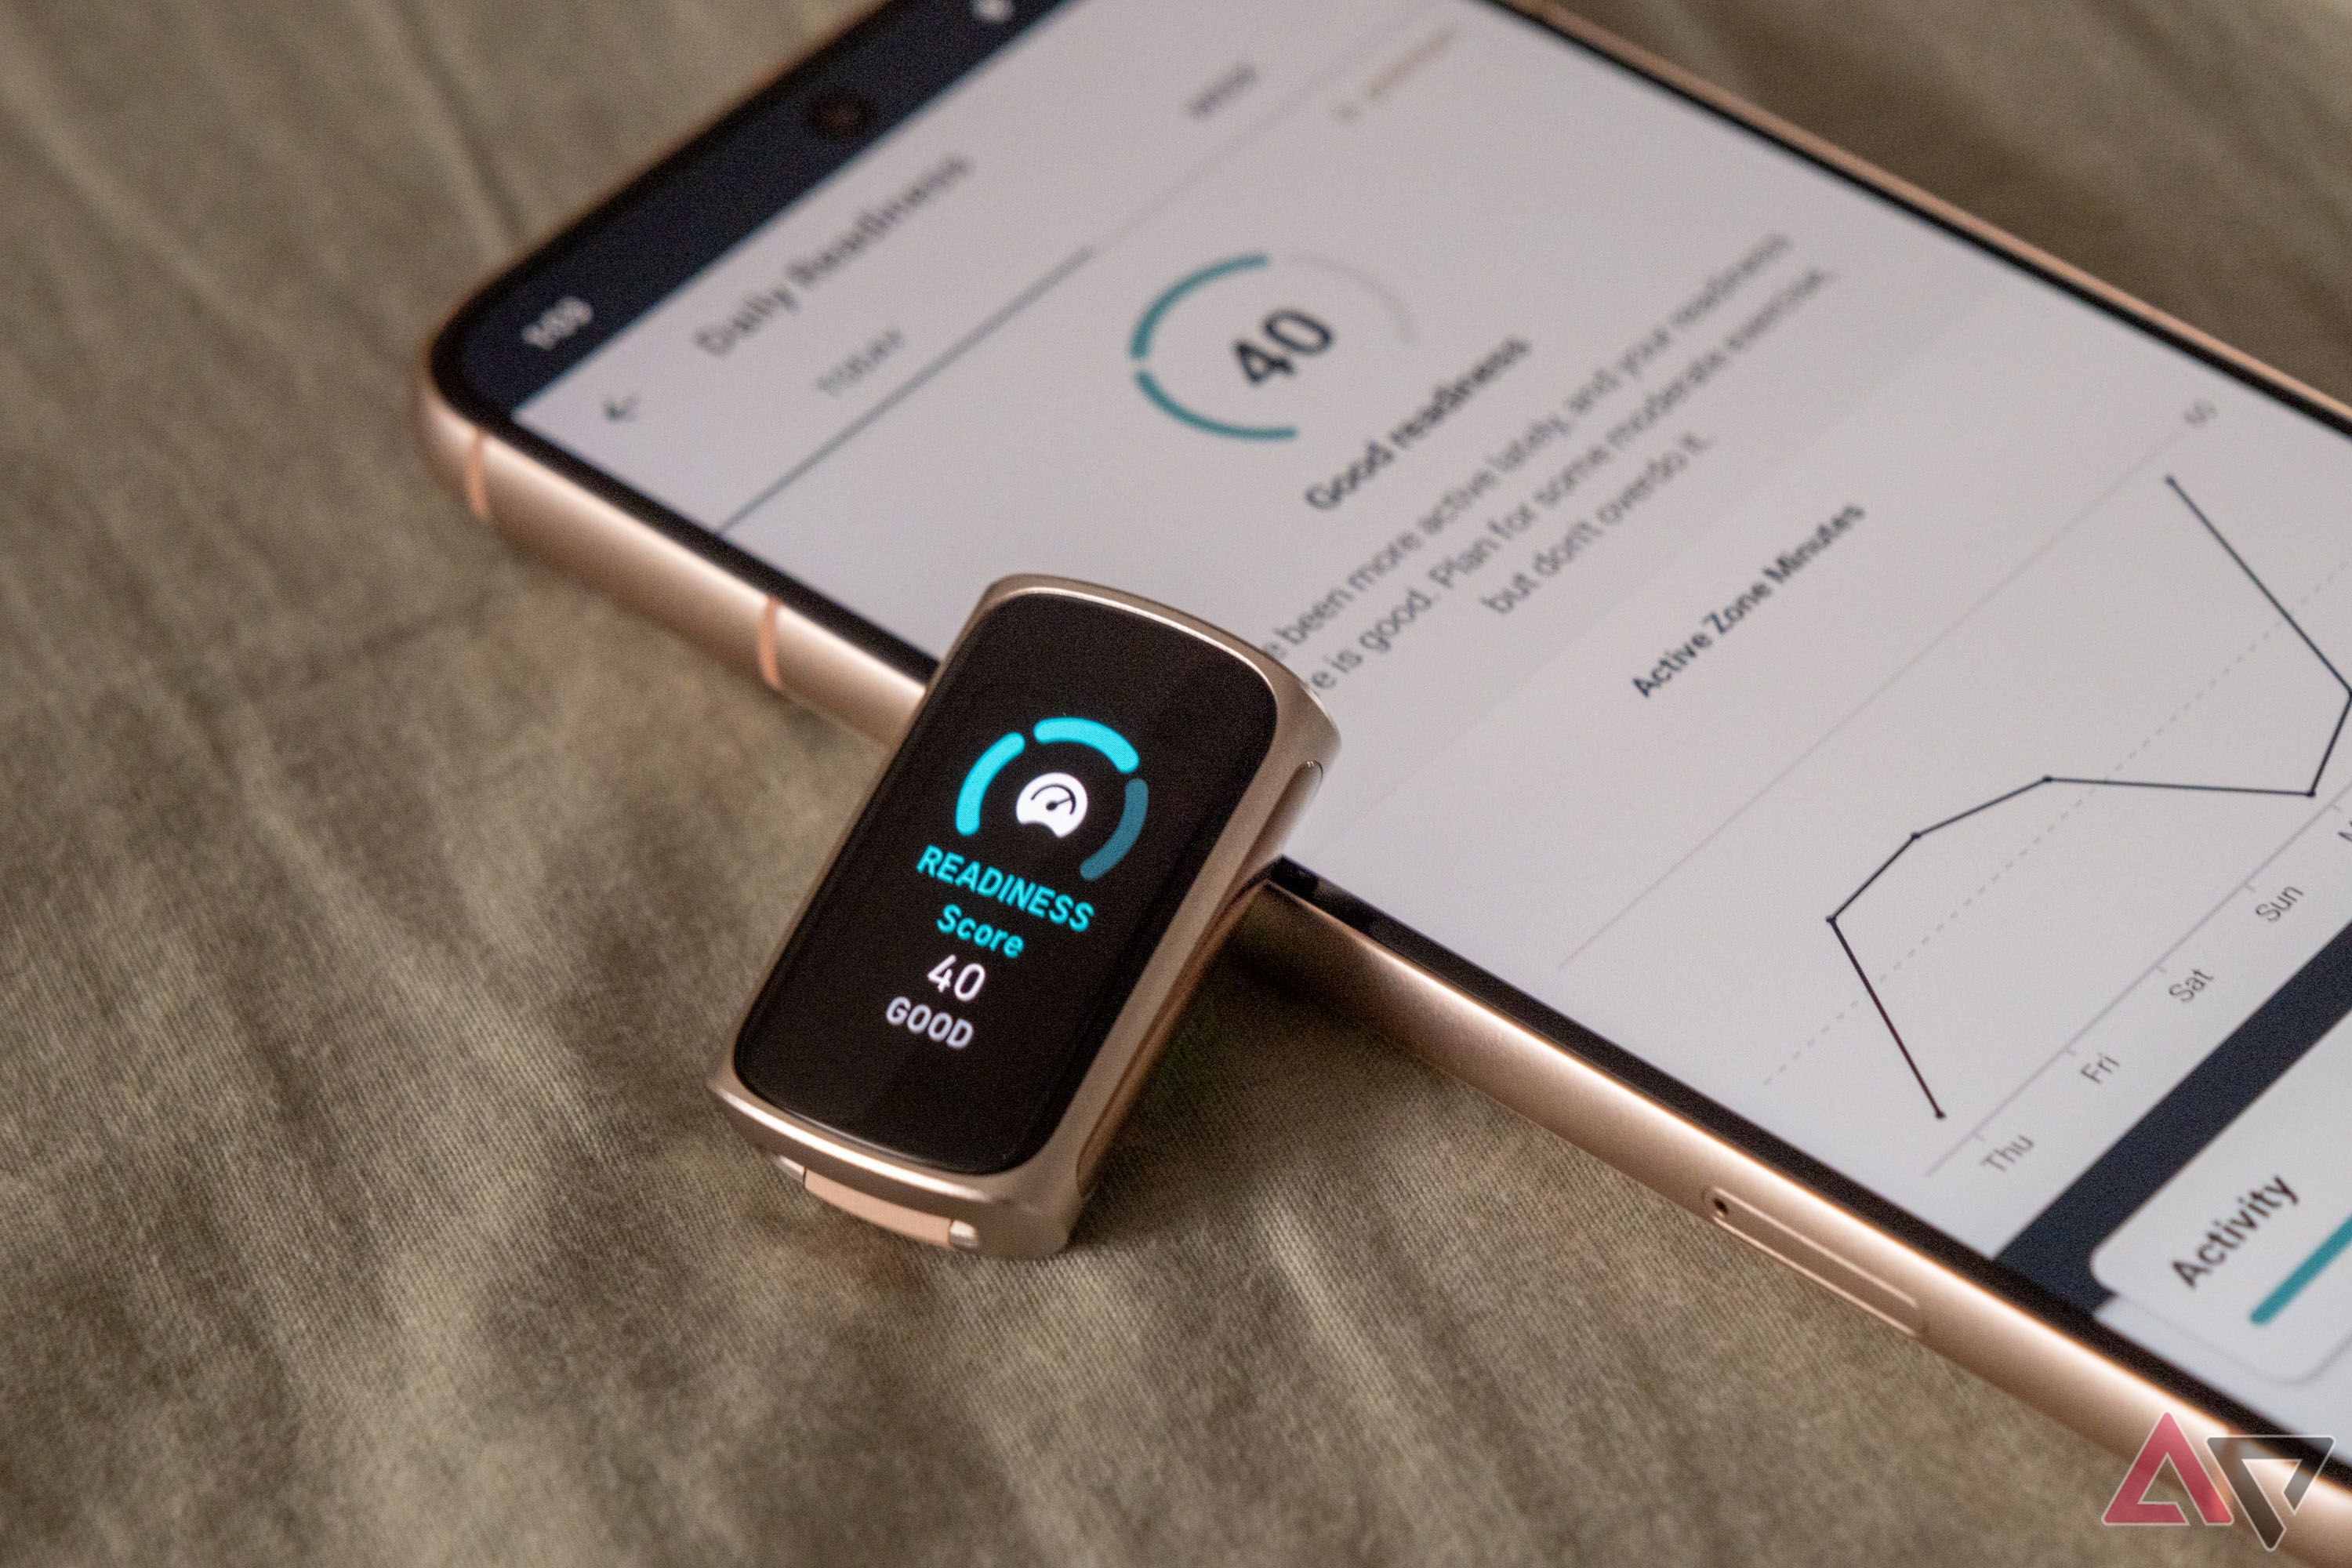 A Fitbit Charge 6 without bands showing a readiness score leaning on a smartphone with the Fitbit app open to the readiness score page on a wooden table.